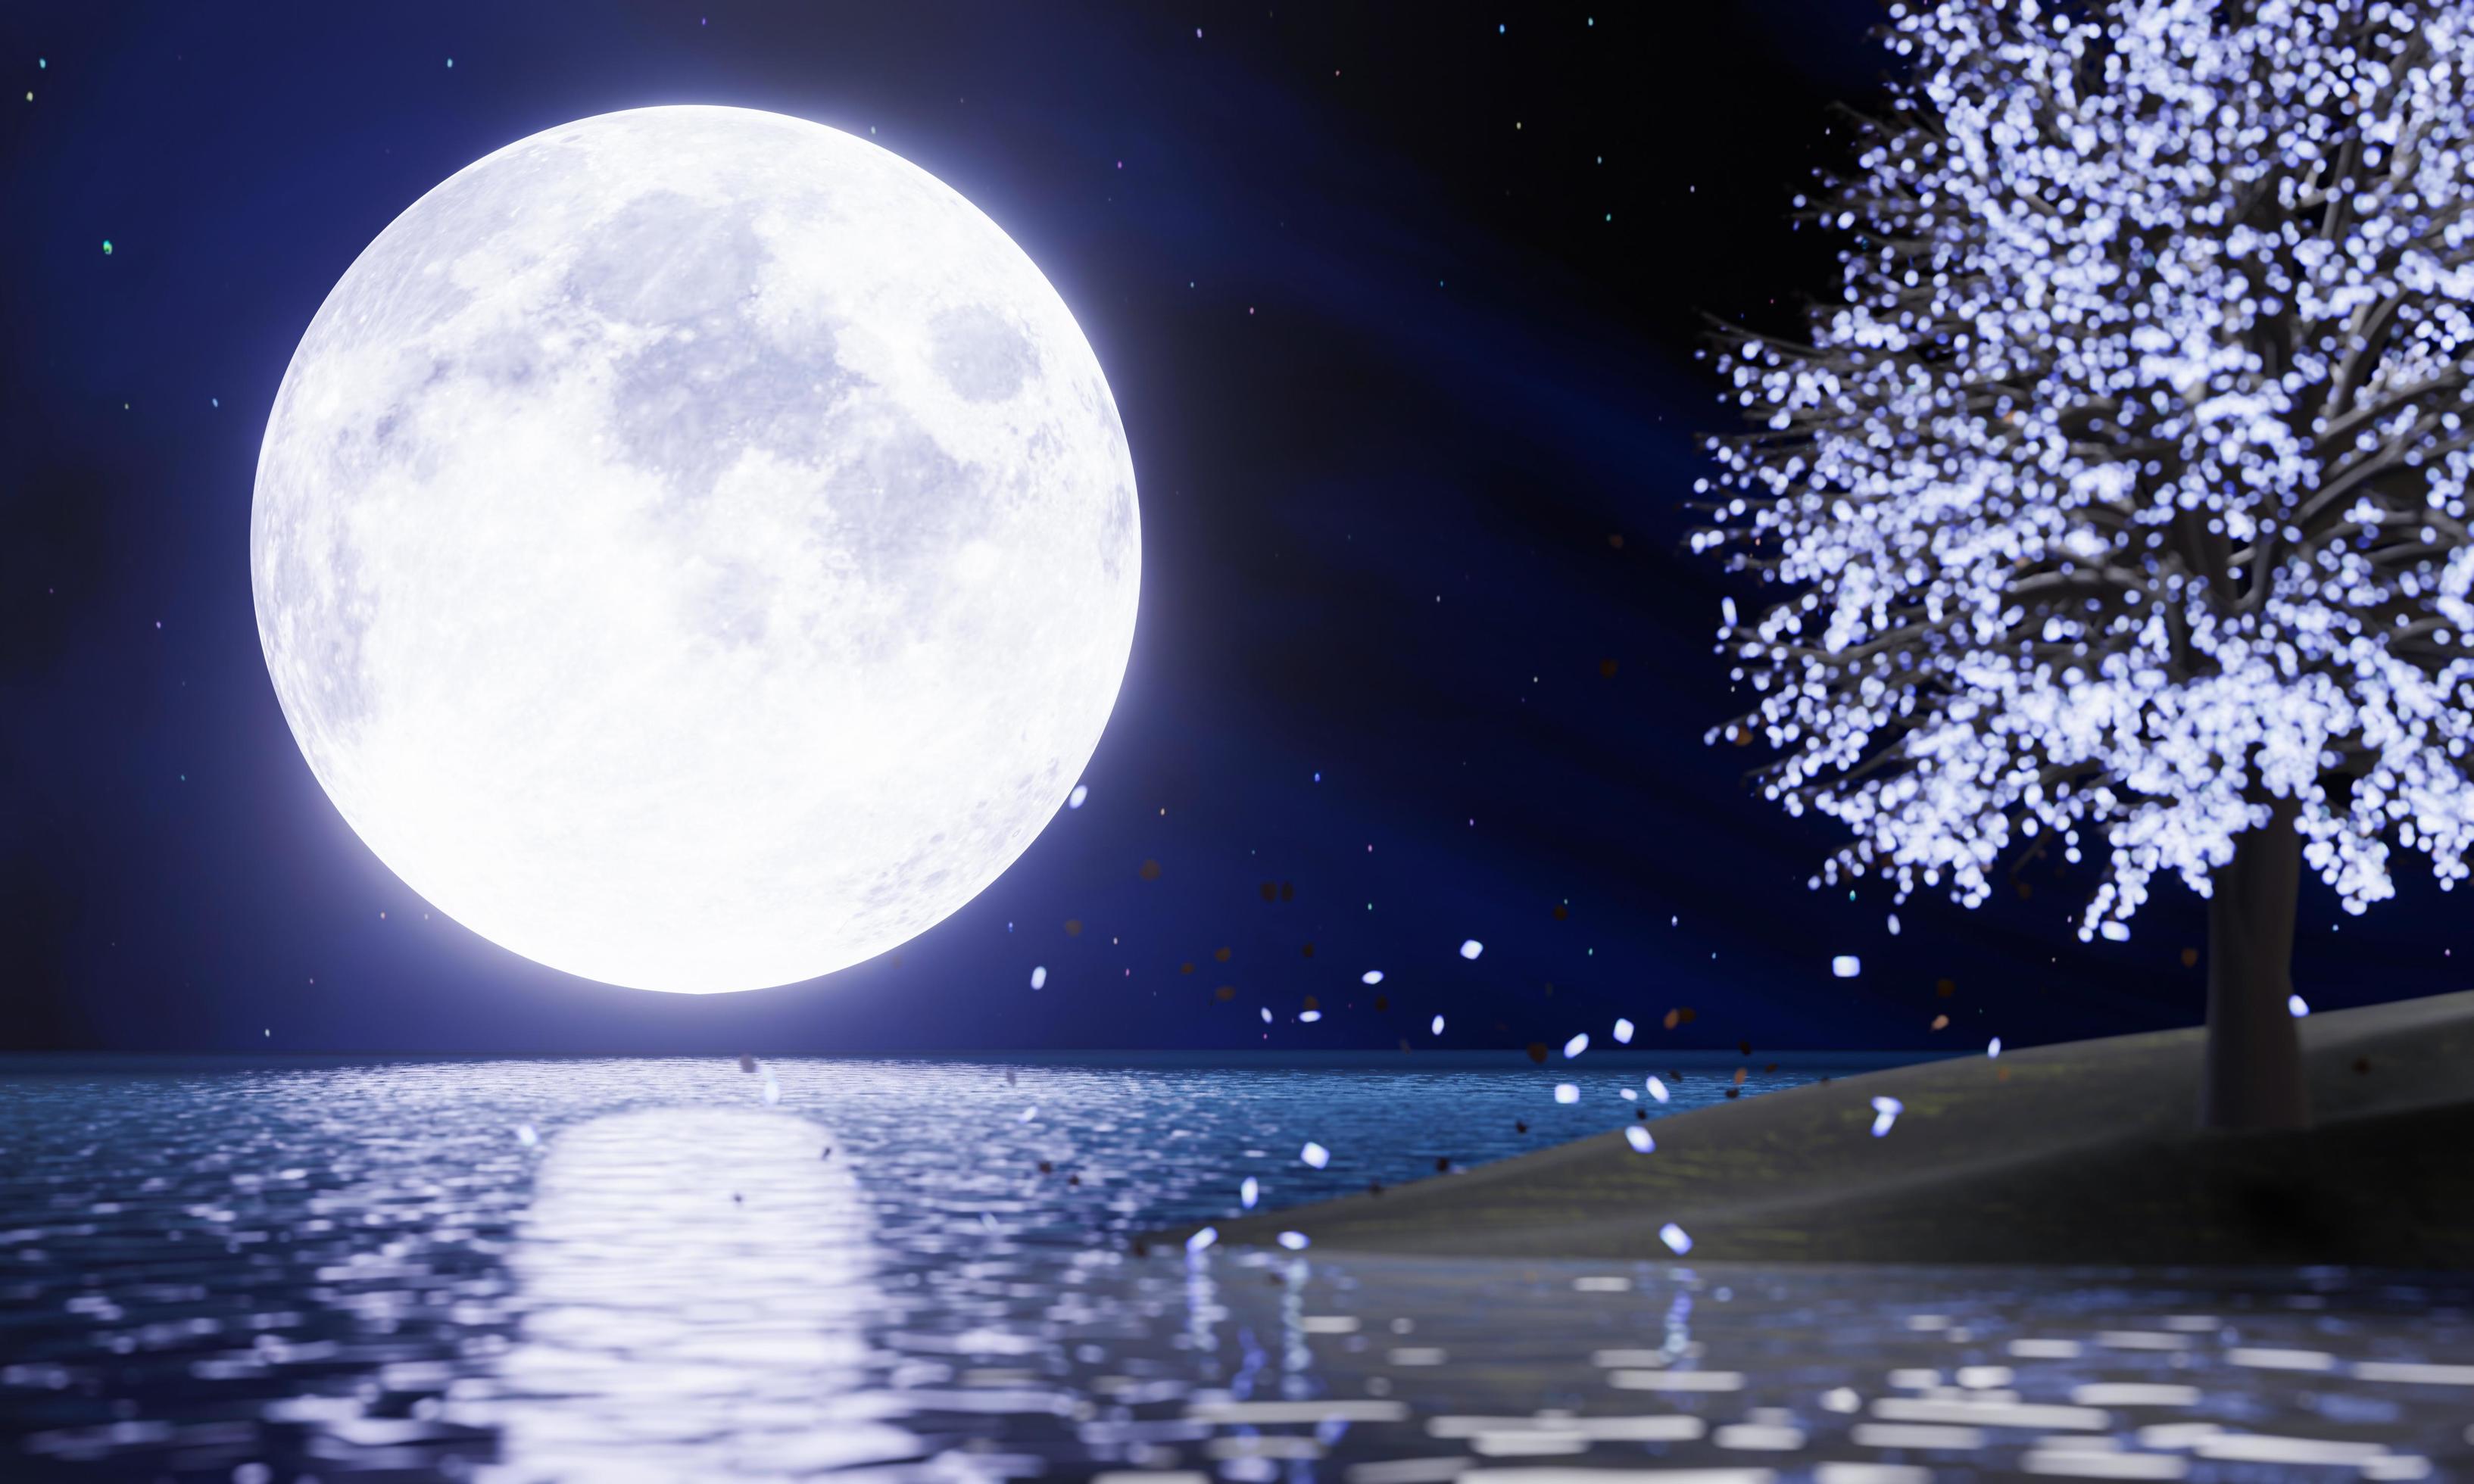 full blue moon In the night sky there are stars in the sky. Super Moon in  the middle of the sea with reflections on the water surface. Blurred  fantasy trees glowing leaves